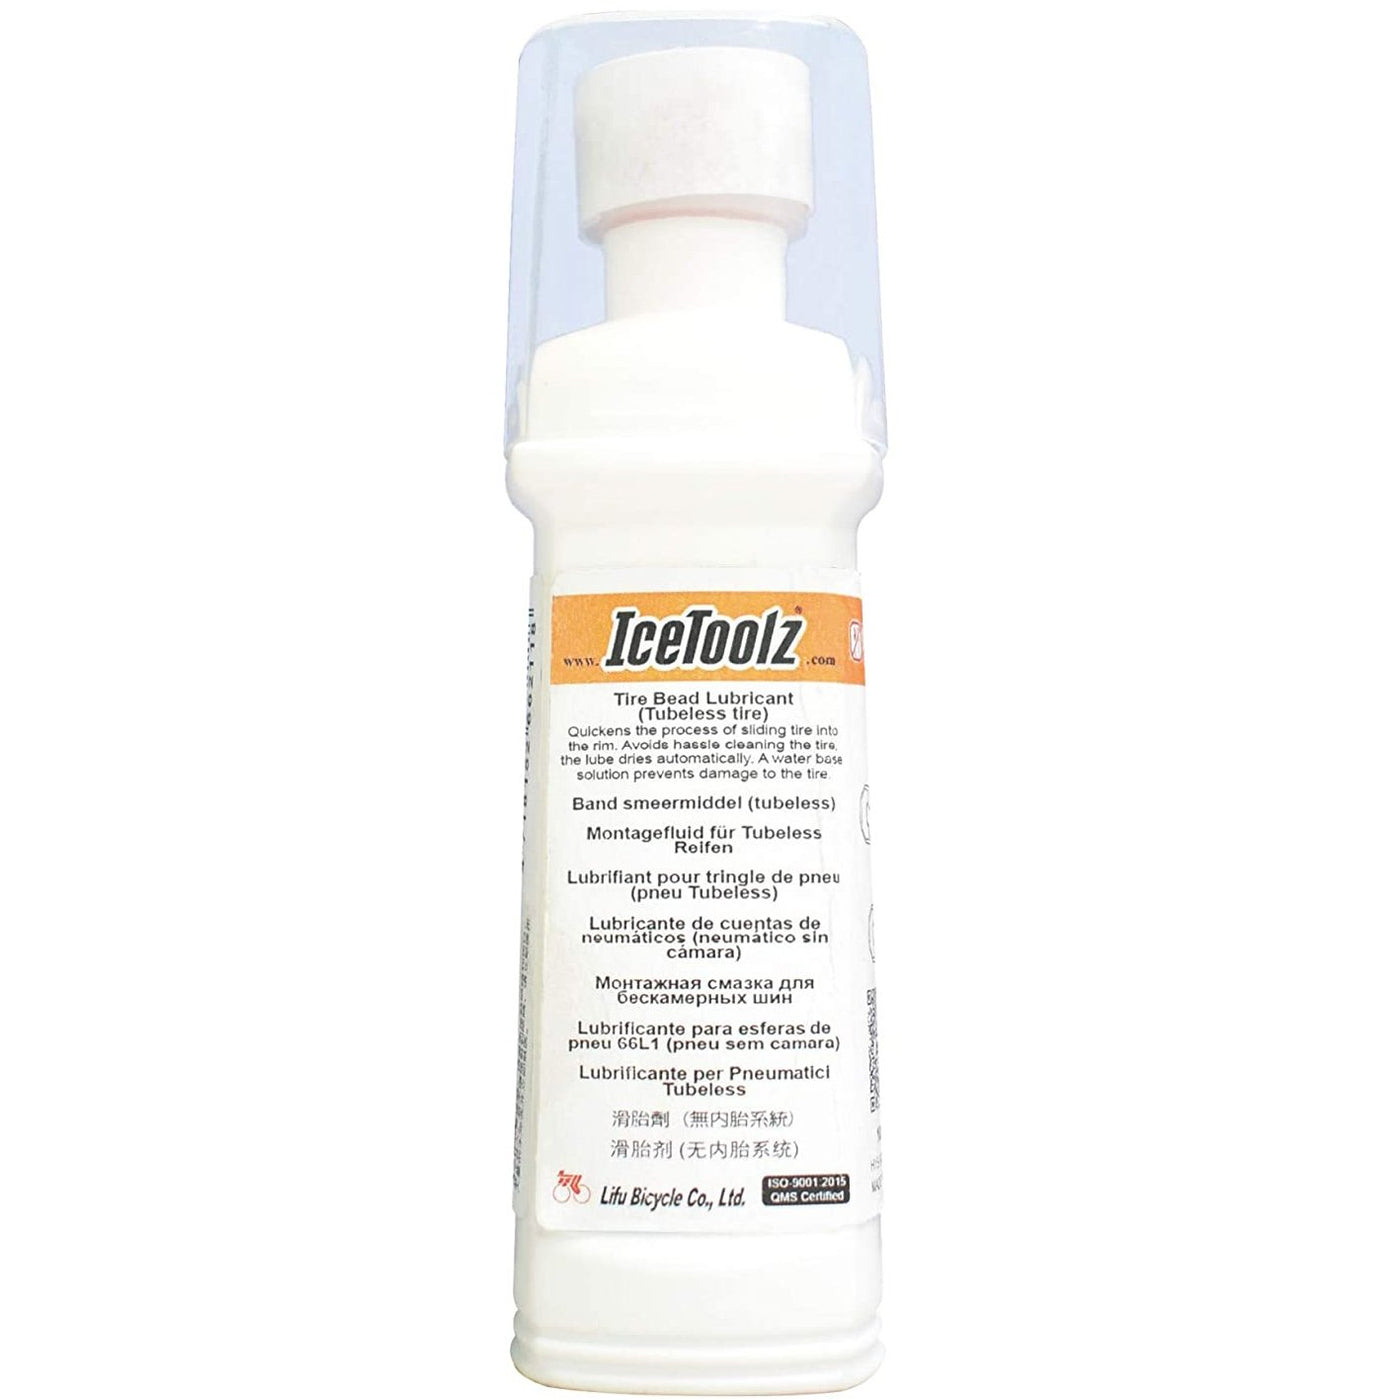 Icetoolz Tire Bead Lubricant Tubeless Tire - Cyclop.in